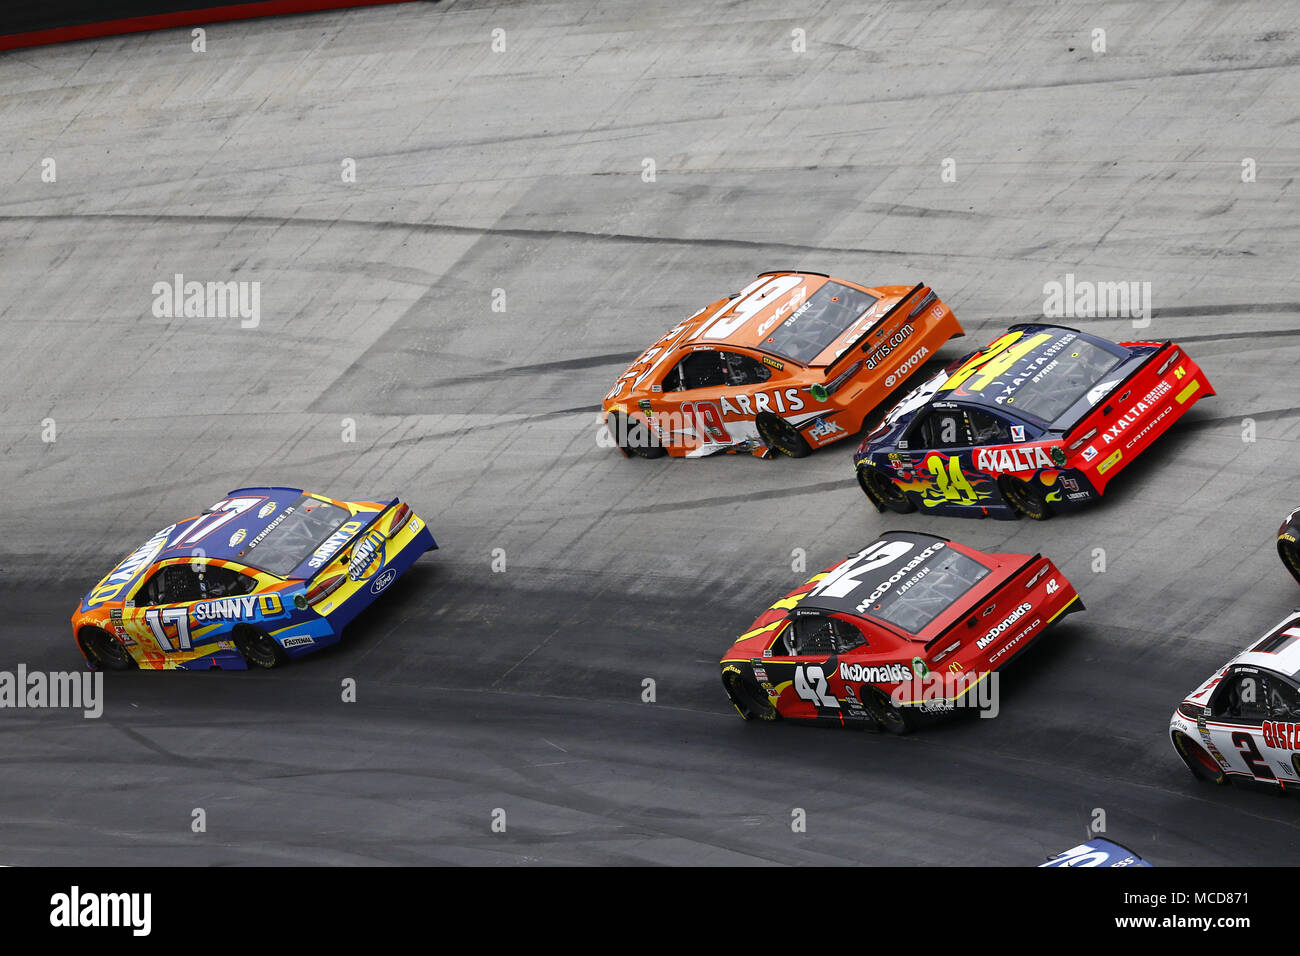 Bristol, Tennessee, USA. 15th Apr, 2018. April 15, 2018 - Bristol, Tennessee, USA: Ricky Stenhouse, Jr (17), Daniel Suarez (19), William Byron (24), Kyle Larson (42) and Brad Keselowski (2) battle for position during the Food City 500 at Bristol Motor Speedway in Bristol, Tennessee. Credit: Chris Owens Asp Inc/ASP/ZUMA Wire/Alamy Live News Stock Photo